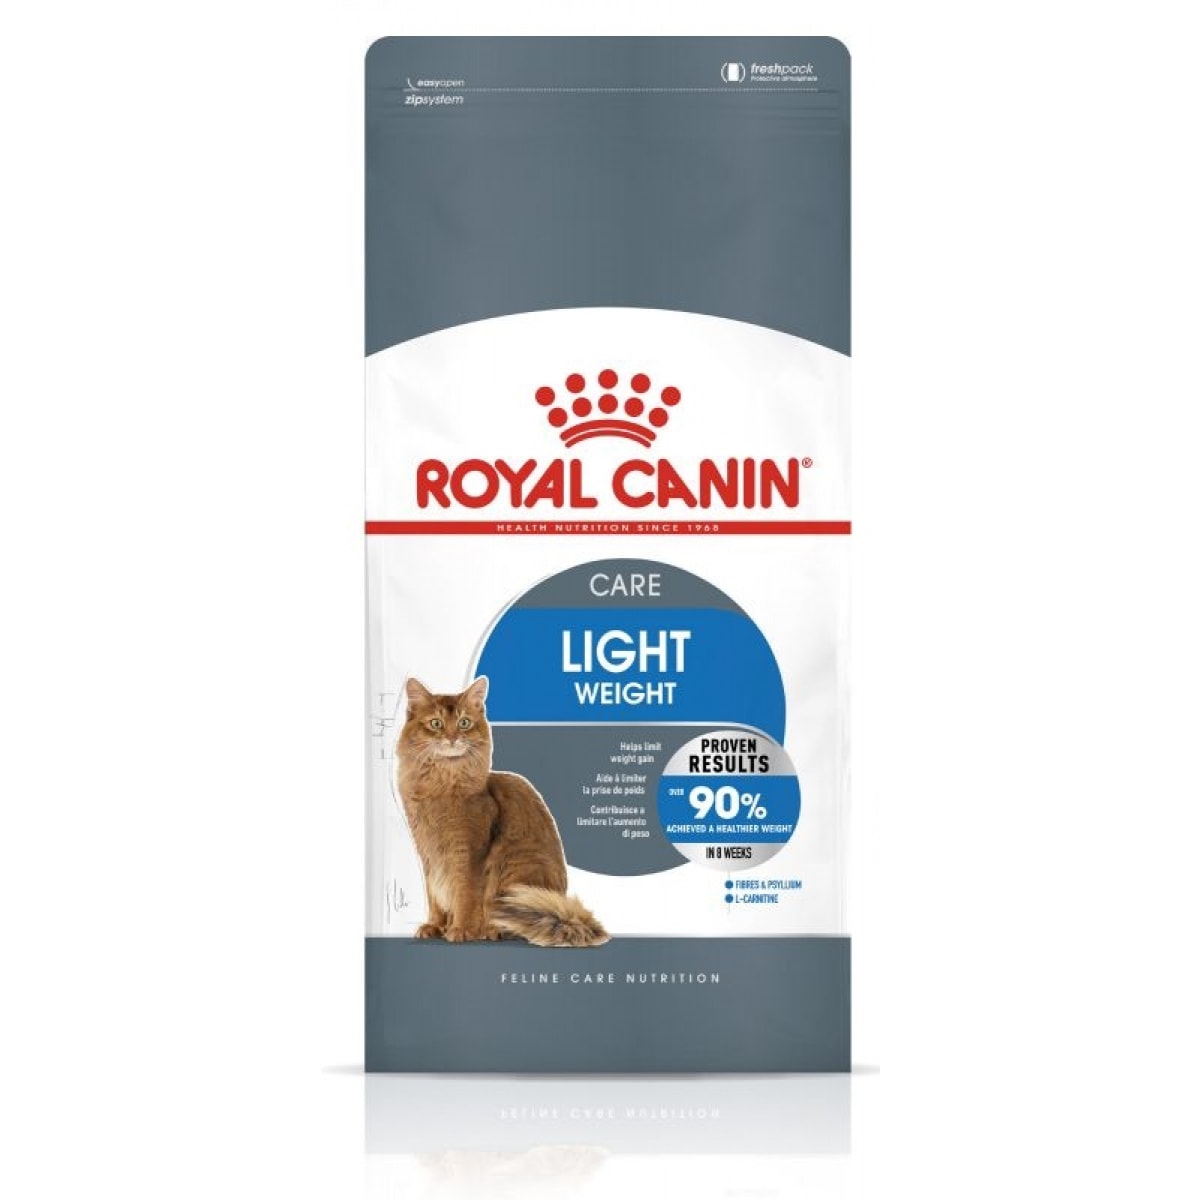 Royal Canin – Light Weight Care 400g – Pawfect Supplies Ltd Product Image